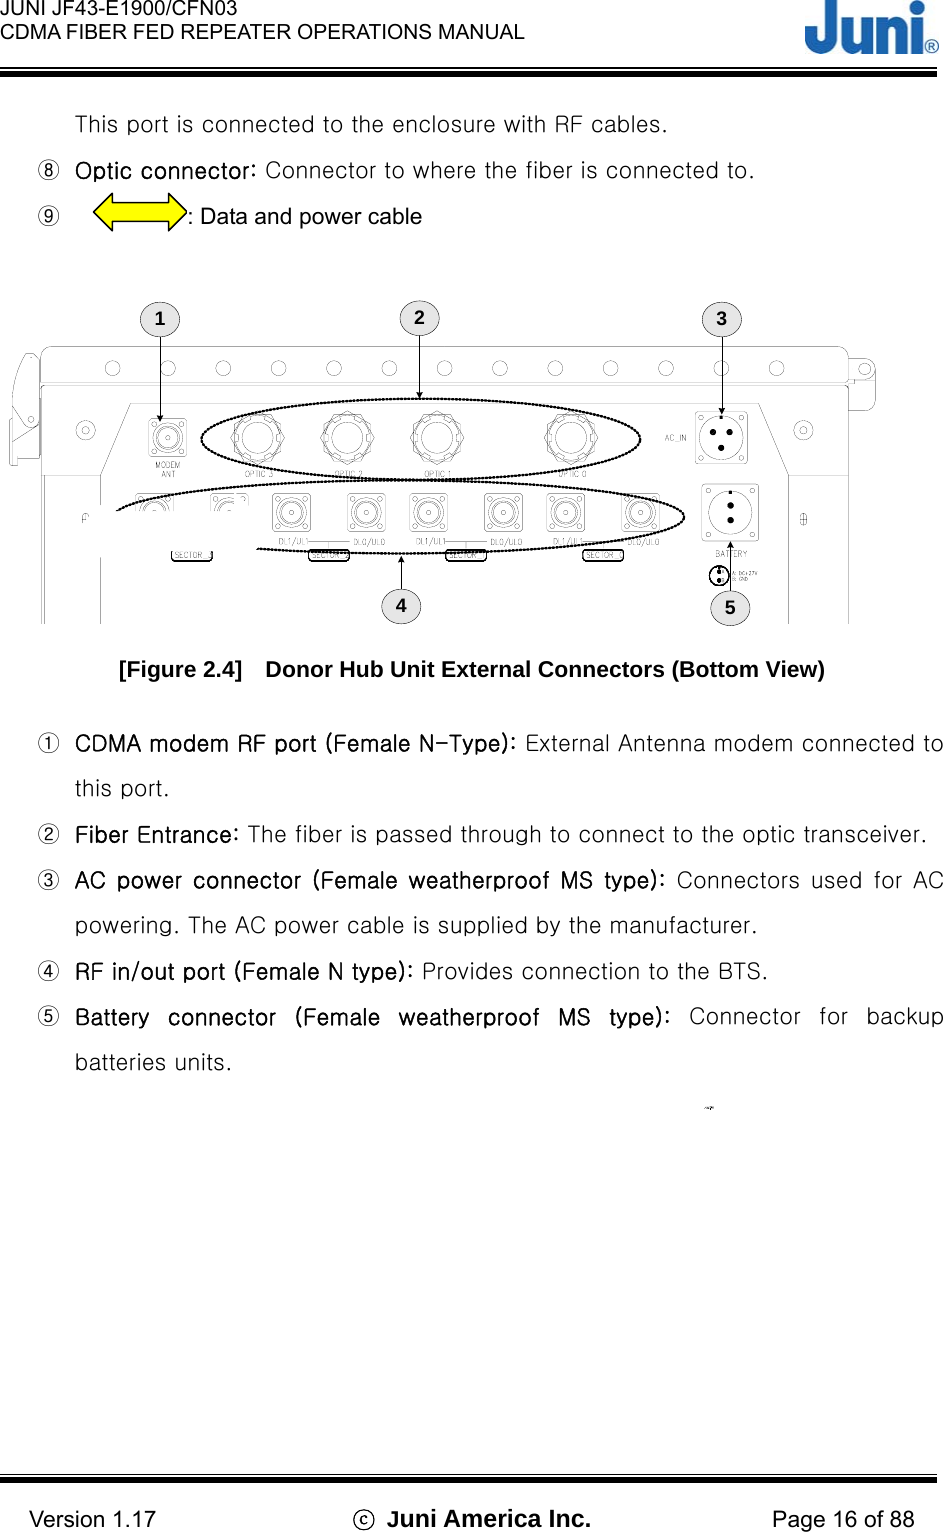  JUNI JF43-E1900/CFN03 CDMA FIBER FED REPEATER OPERATIONS MANUAL                                    Version 1.17  ⓒ Juni America Inc. Page 16 of 88 This port is connected to the enclosure with RF cables.     ⑧  Optic connector: Connector to where the fiber is connected to. ⑨     12345 [Figure 2.4]    Donor Hub Unit External Connectors (Bottom View)  ①  CDMA modem RF port (Female N-Type): External Antenna modem connected to this port. ②  Fiber Entrance: The fiber is passed through to connect to the optic transceiver. ③  AC  power  connector  (Female  weatherproof  MS  type):  Connectors  used  for  AC powering. The AC power cable is supplied by the manufacturer. ④  RF in/out port (Female N type): Provides connection to the BTS. ⑤  Battery  connector  (Female  weatherproof  MS  type): Connector for backup batteries units.  : Data and power cable